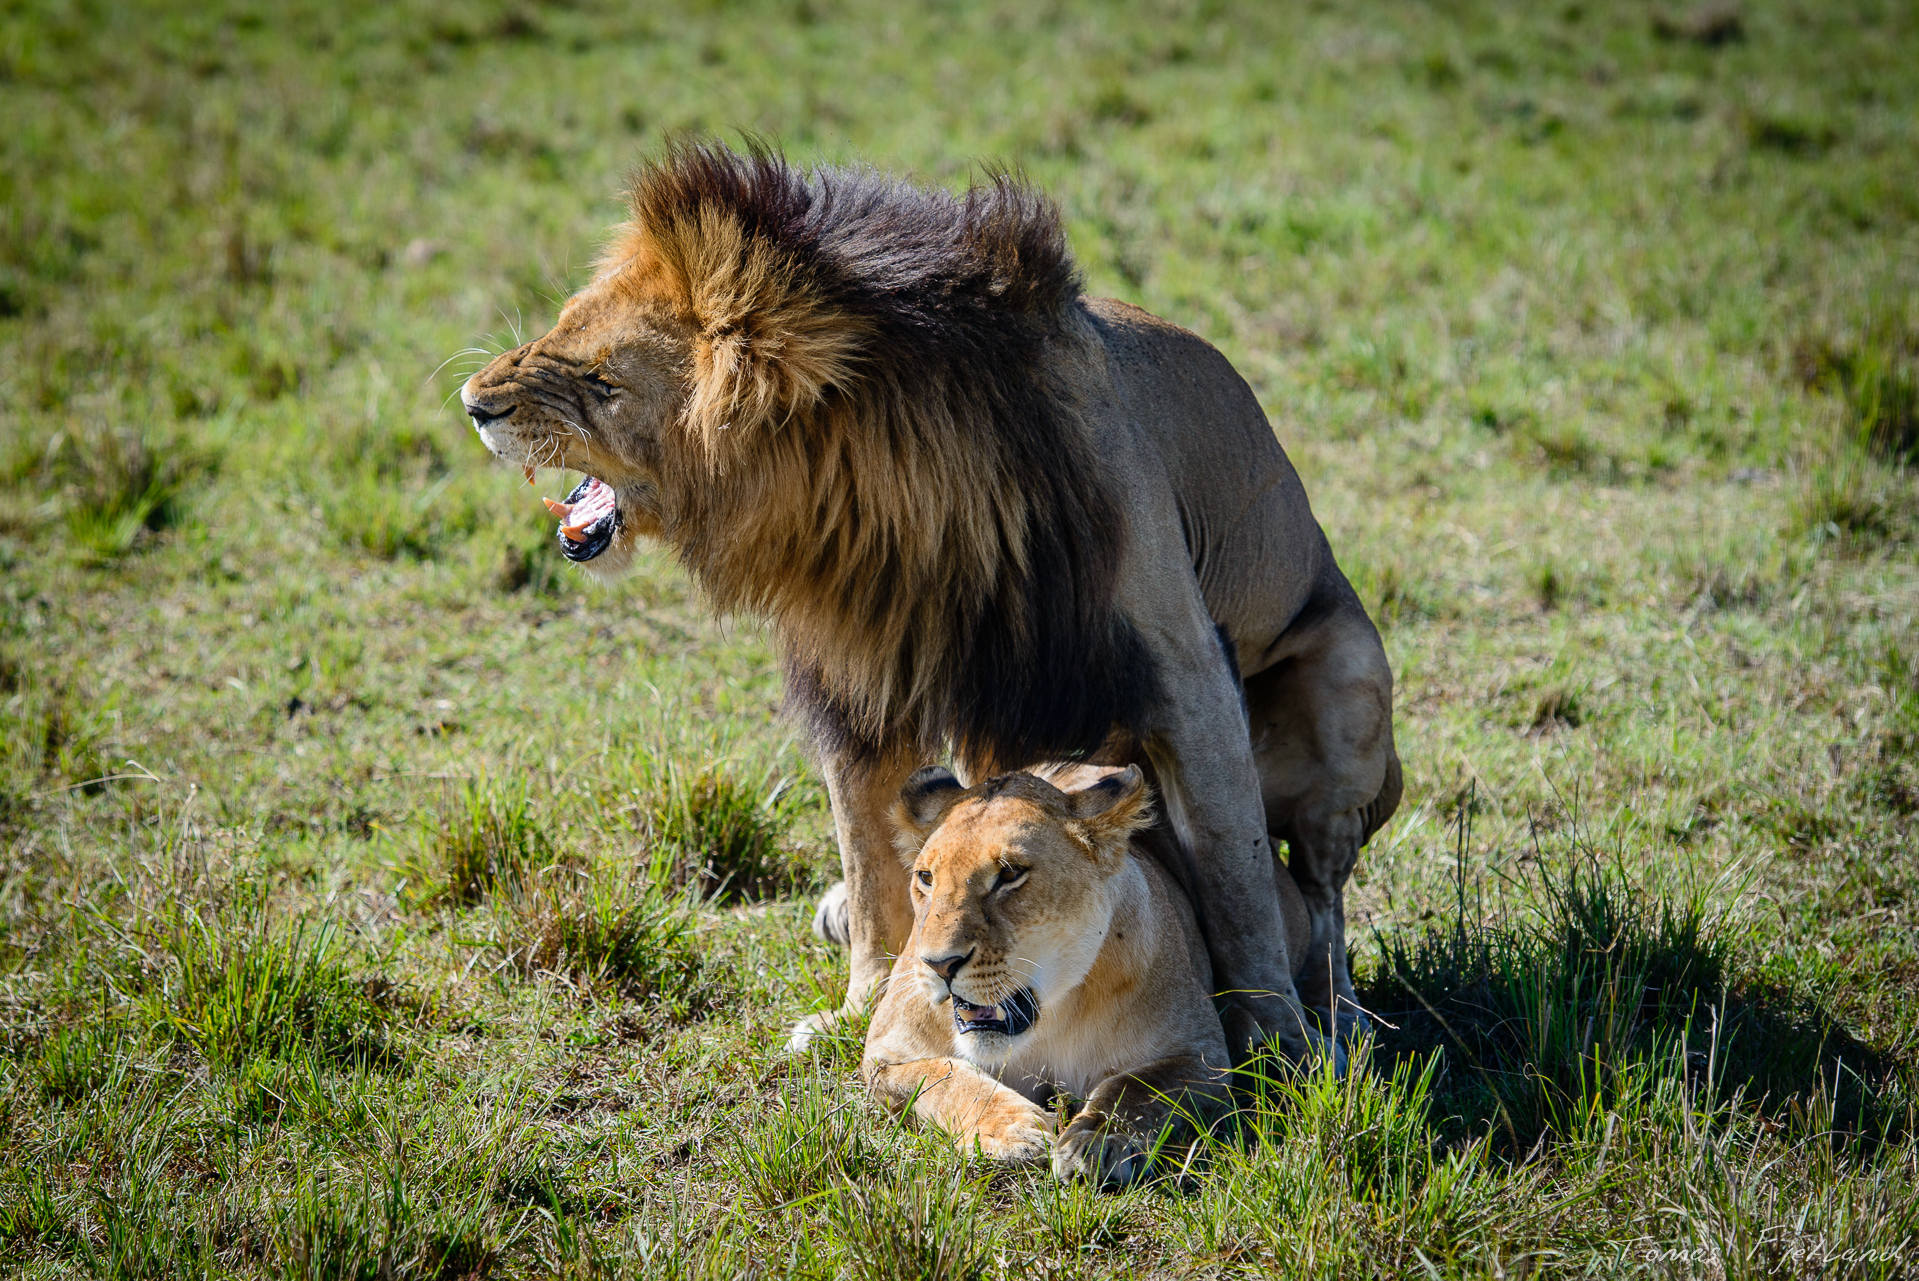 Well, it's lions mating...